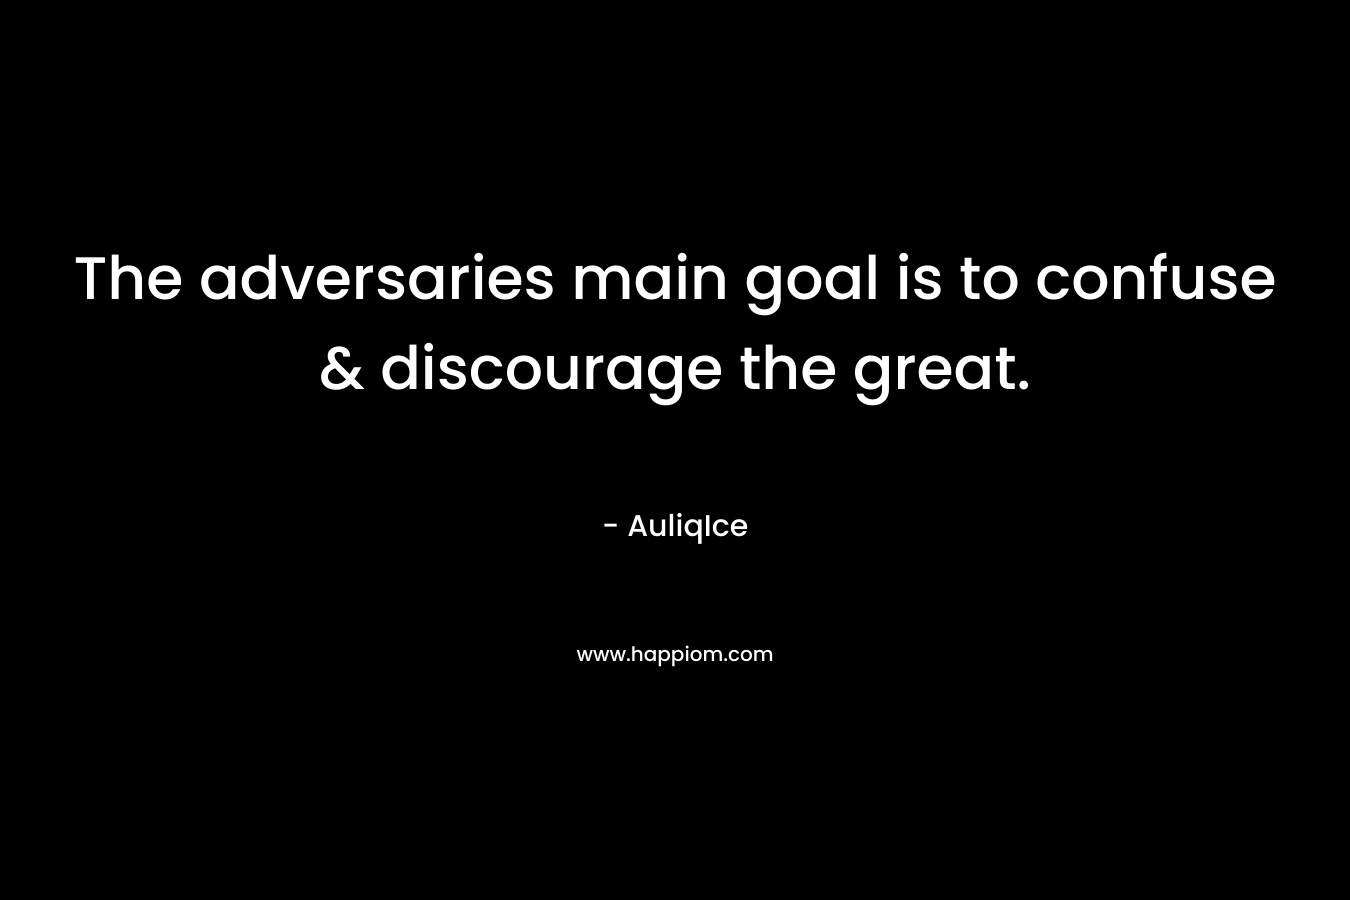 The adversaries main goal is to confuse & discourage the great.